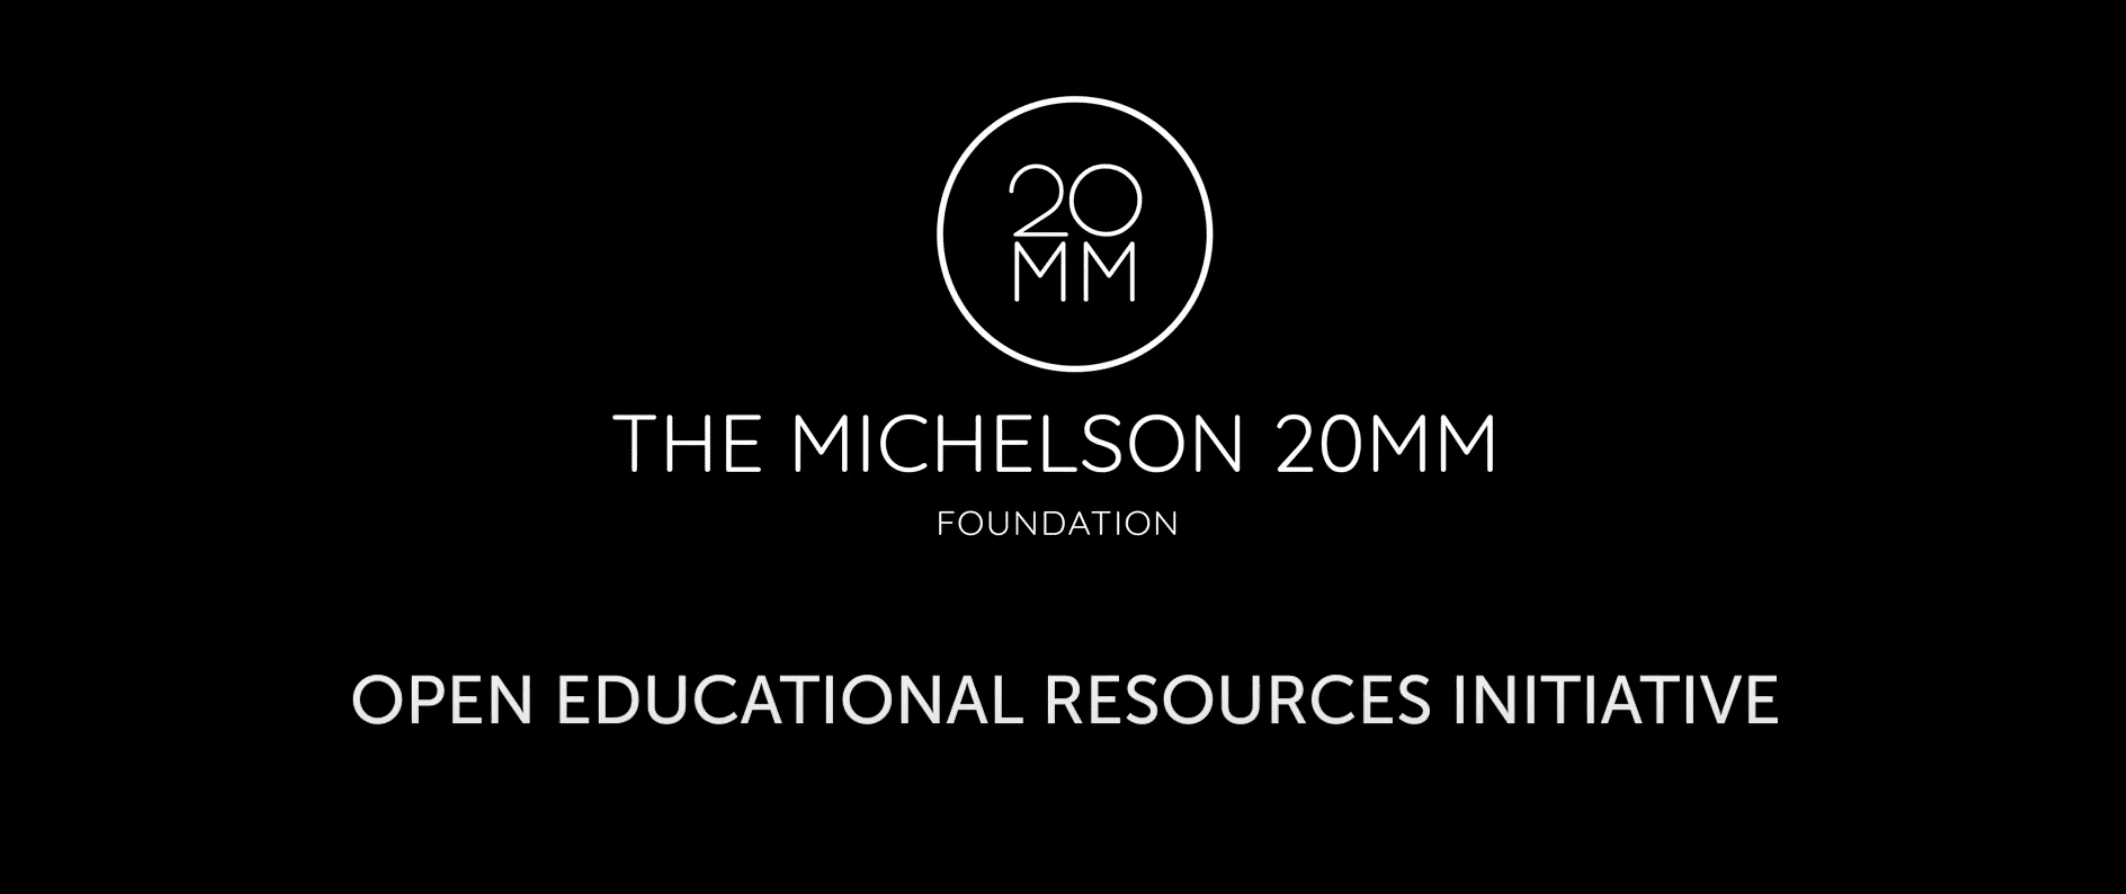 The Michelson 20MM Foundation: Open Educational Resources Initiative